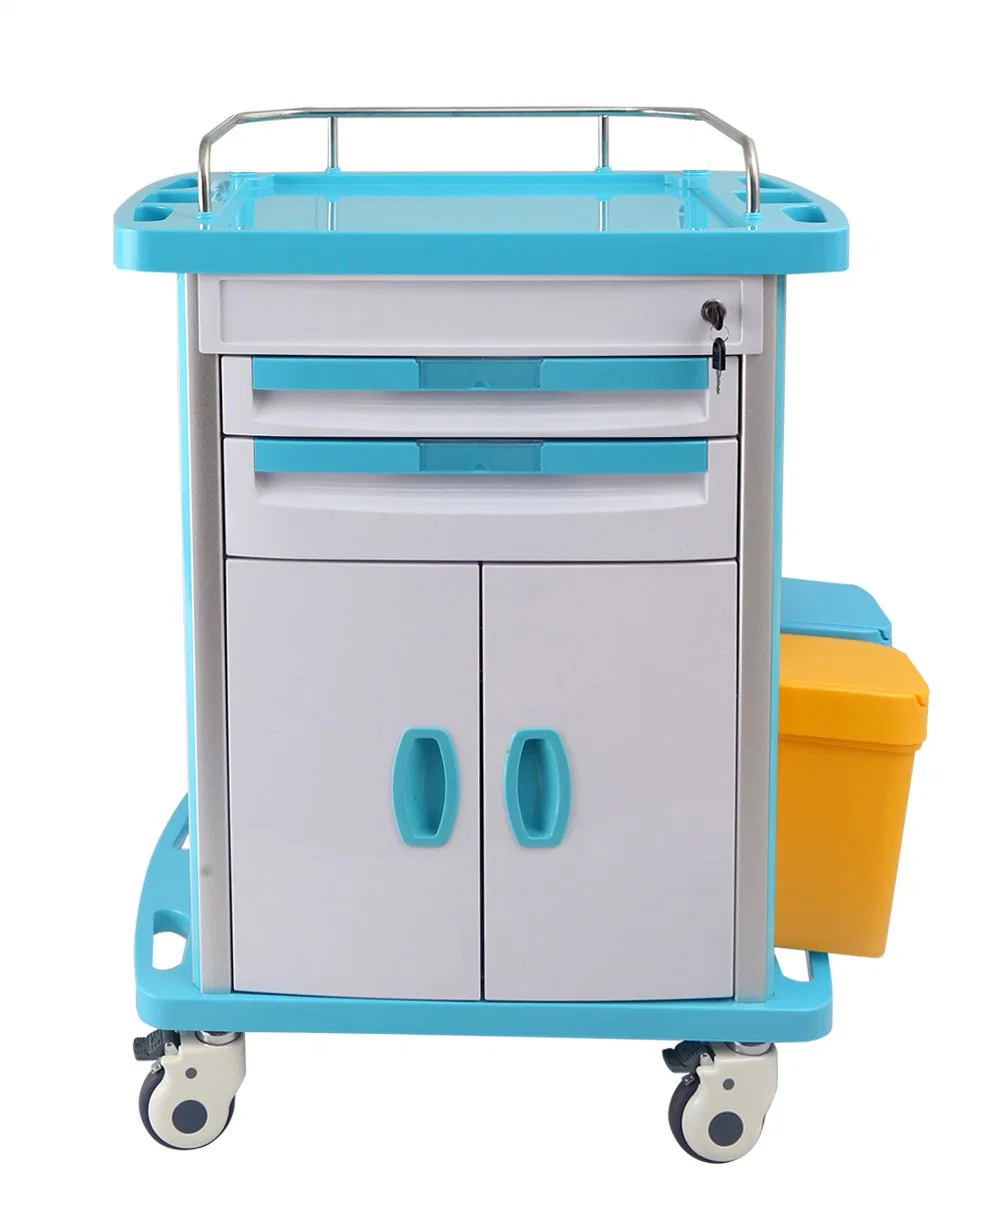 [MT650P] ABS Medicine Distribution Trolley and Cart with Drawers for Medical, Emergency, Logistic, Laundry, Treatment, Anesthesia as Hospital Furniture